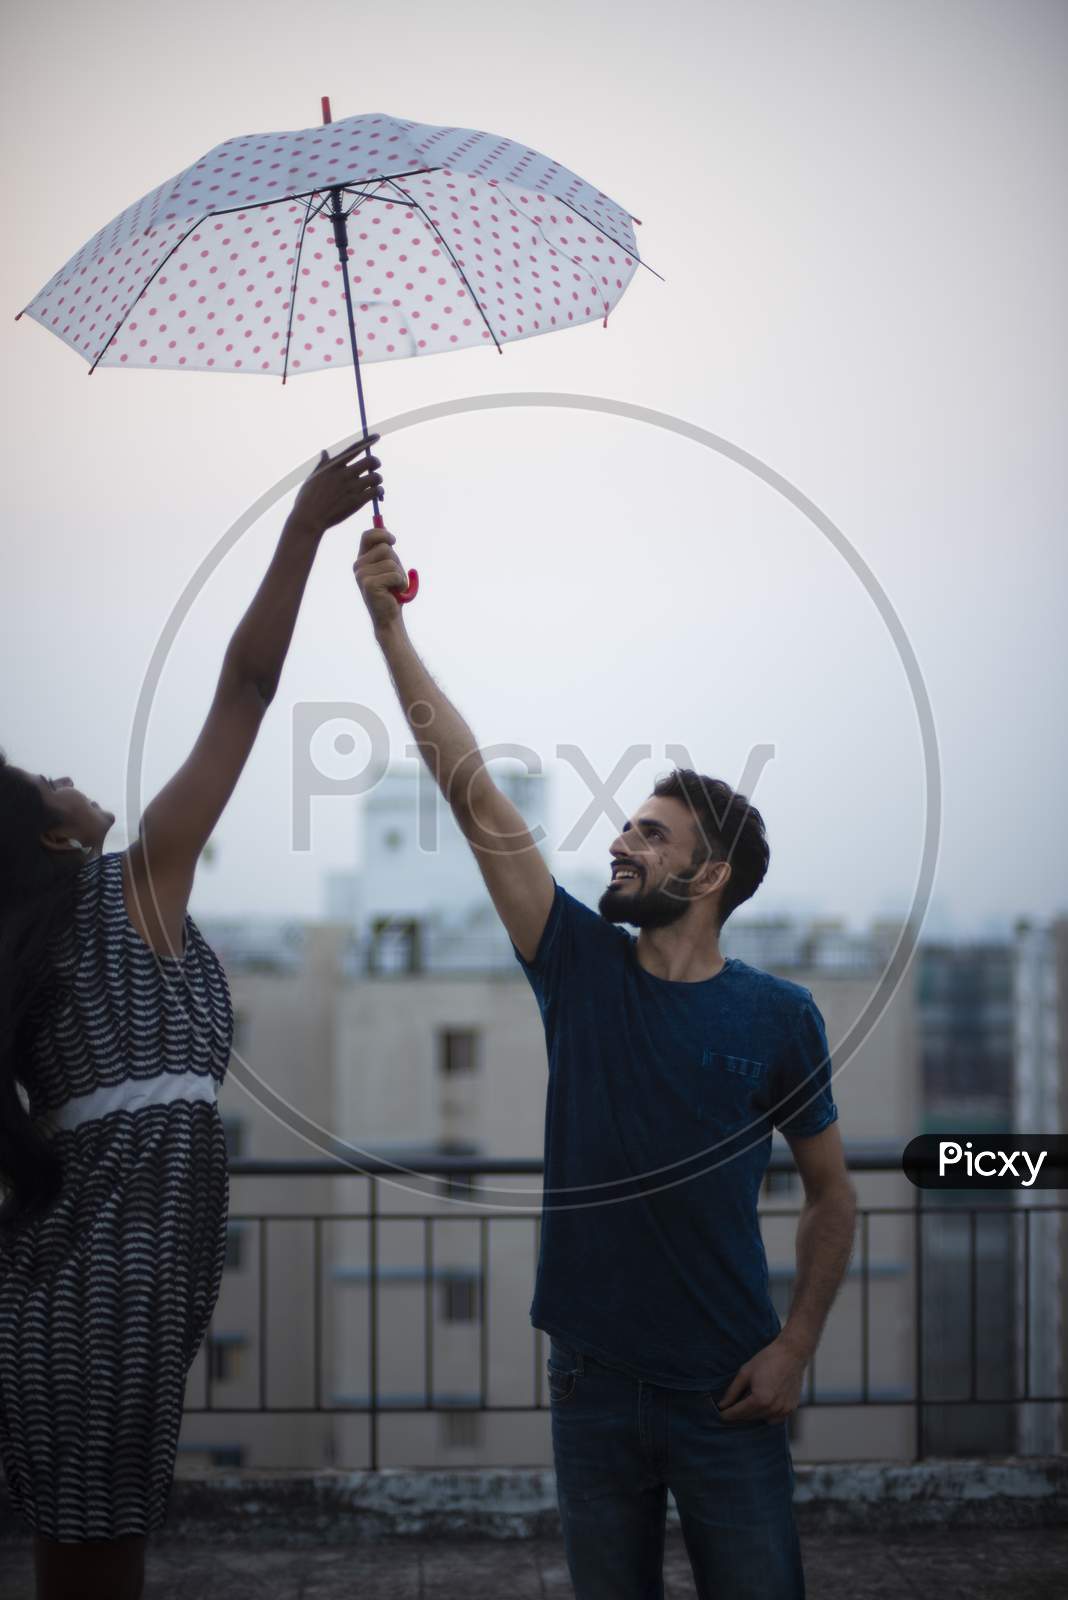 A dark skinned Indian/African girl in  western dress jumping to take the umbrella from her kashmiri/European/Arabian boyfriend on a rooftop in afternoon in urban background. Lifestyle of a couple.